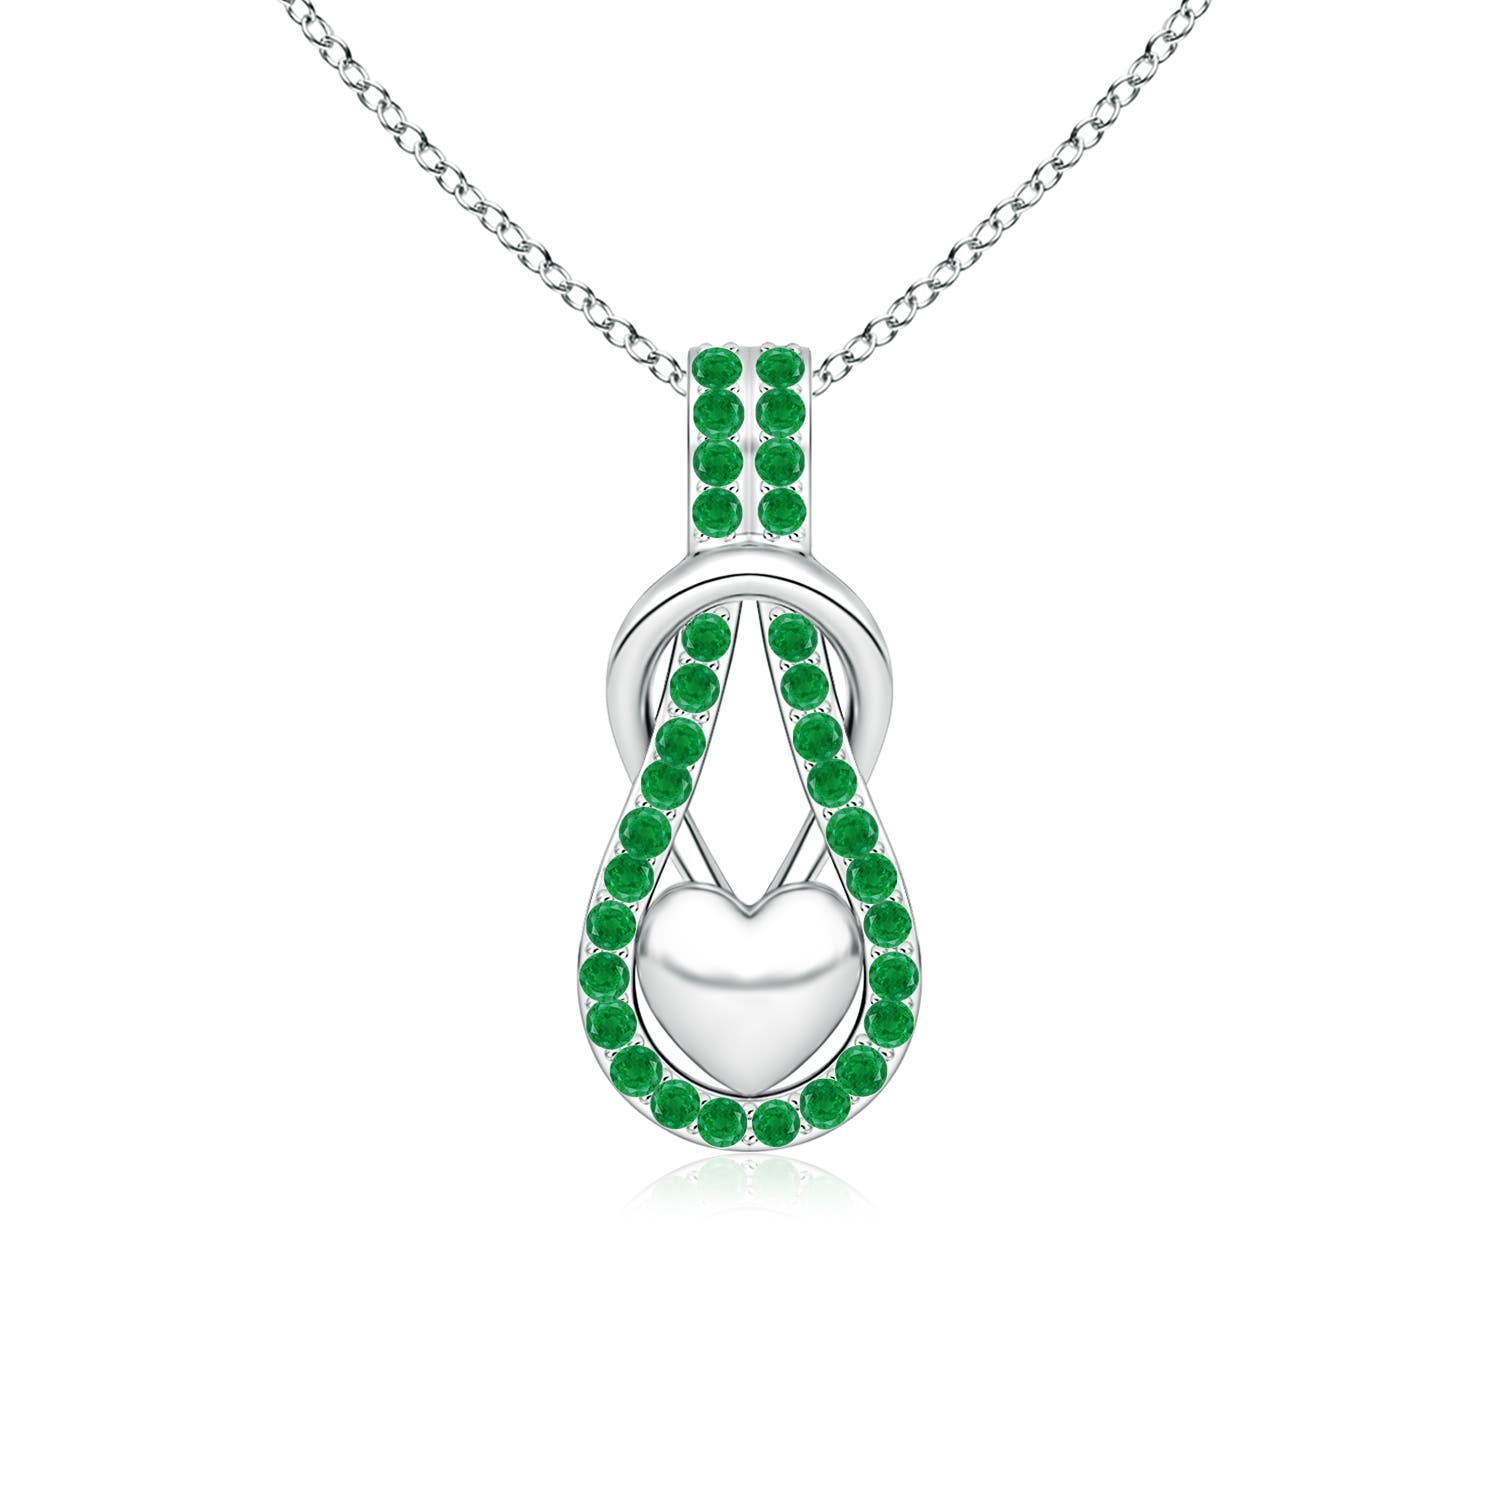 AA - Emerald / 0.48 CT / 14 KT White Gold